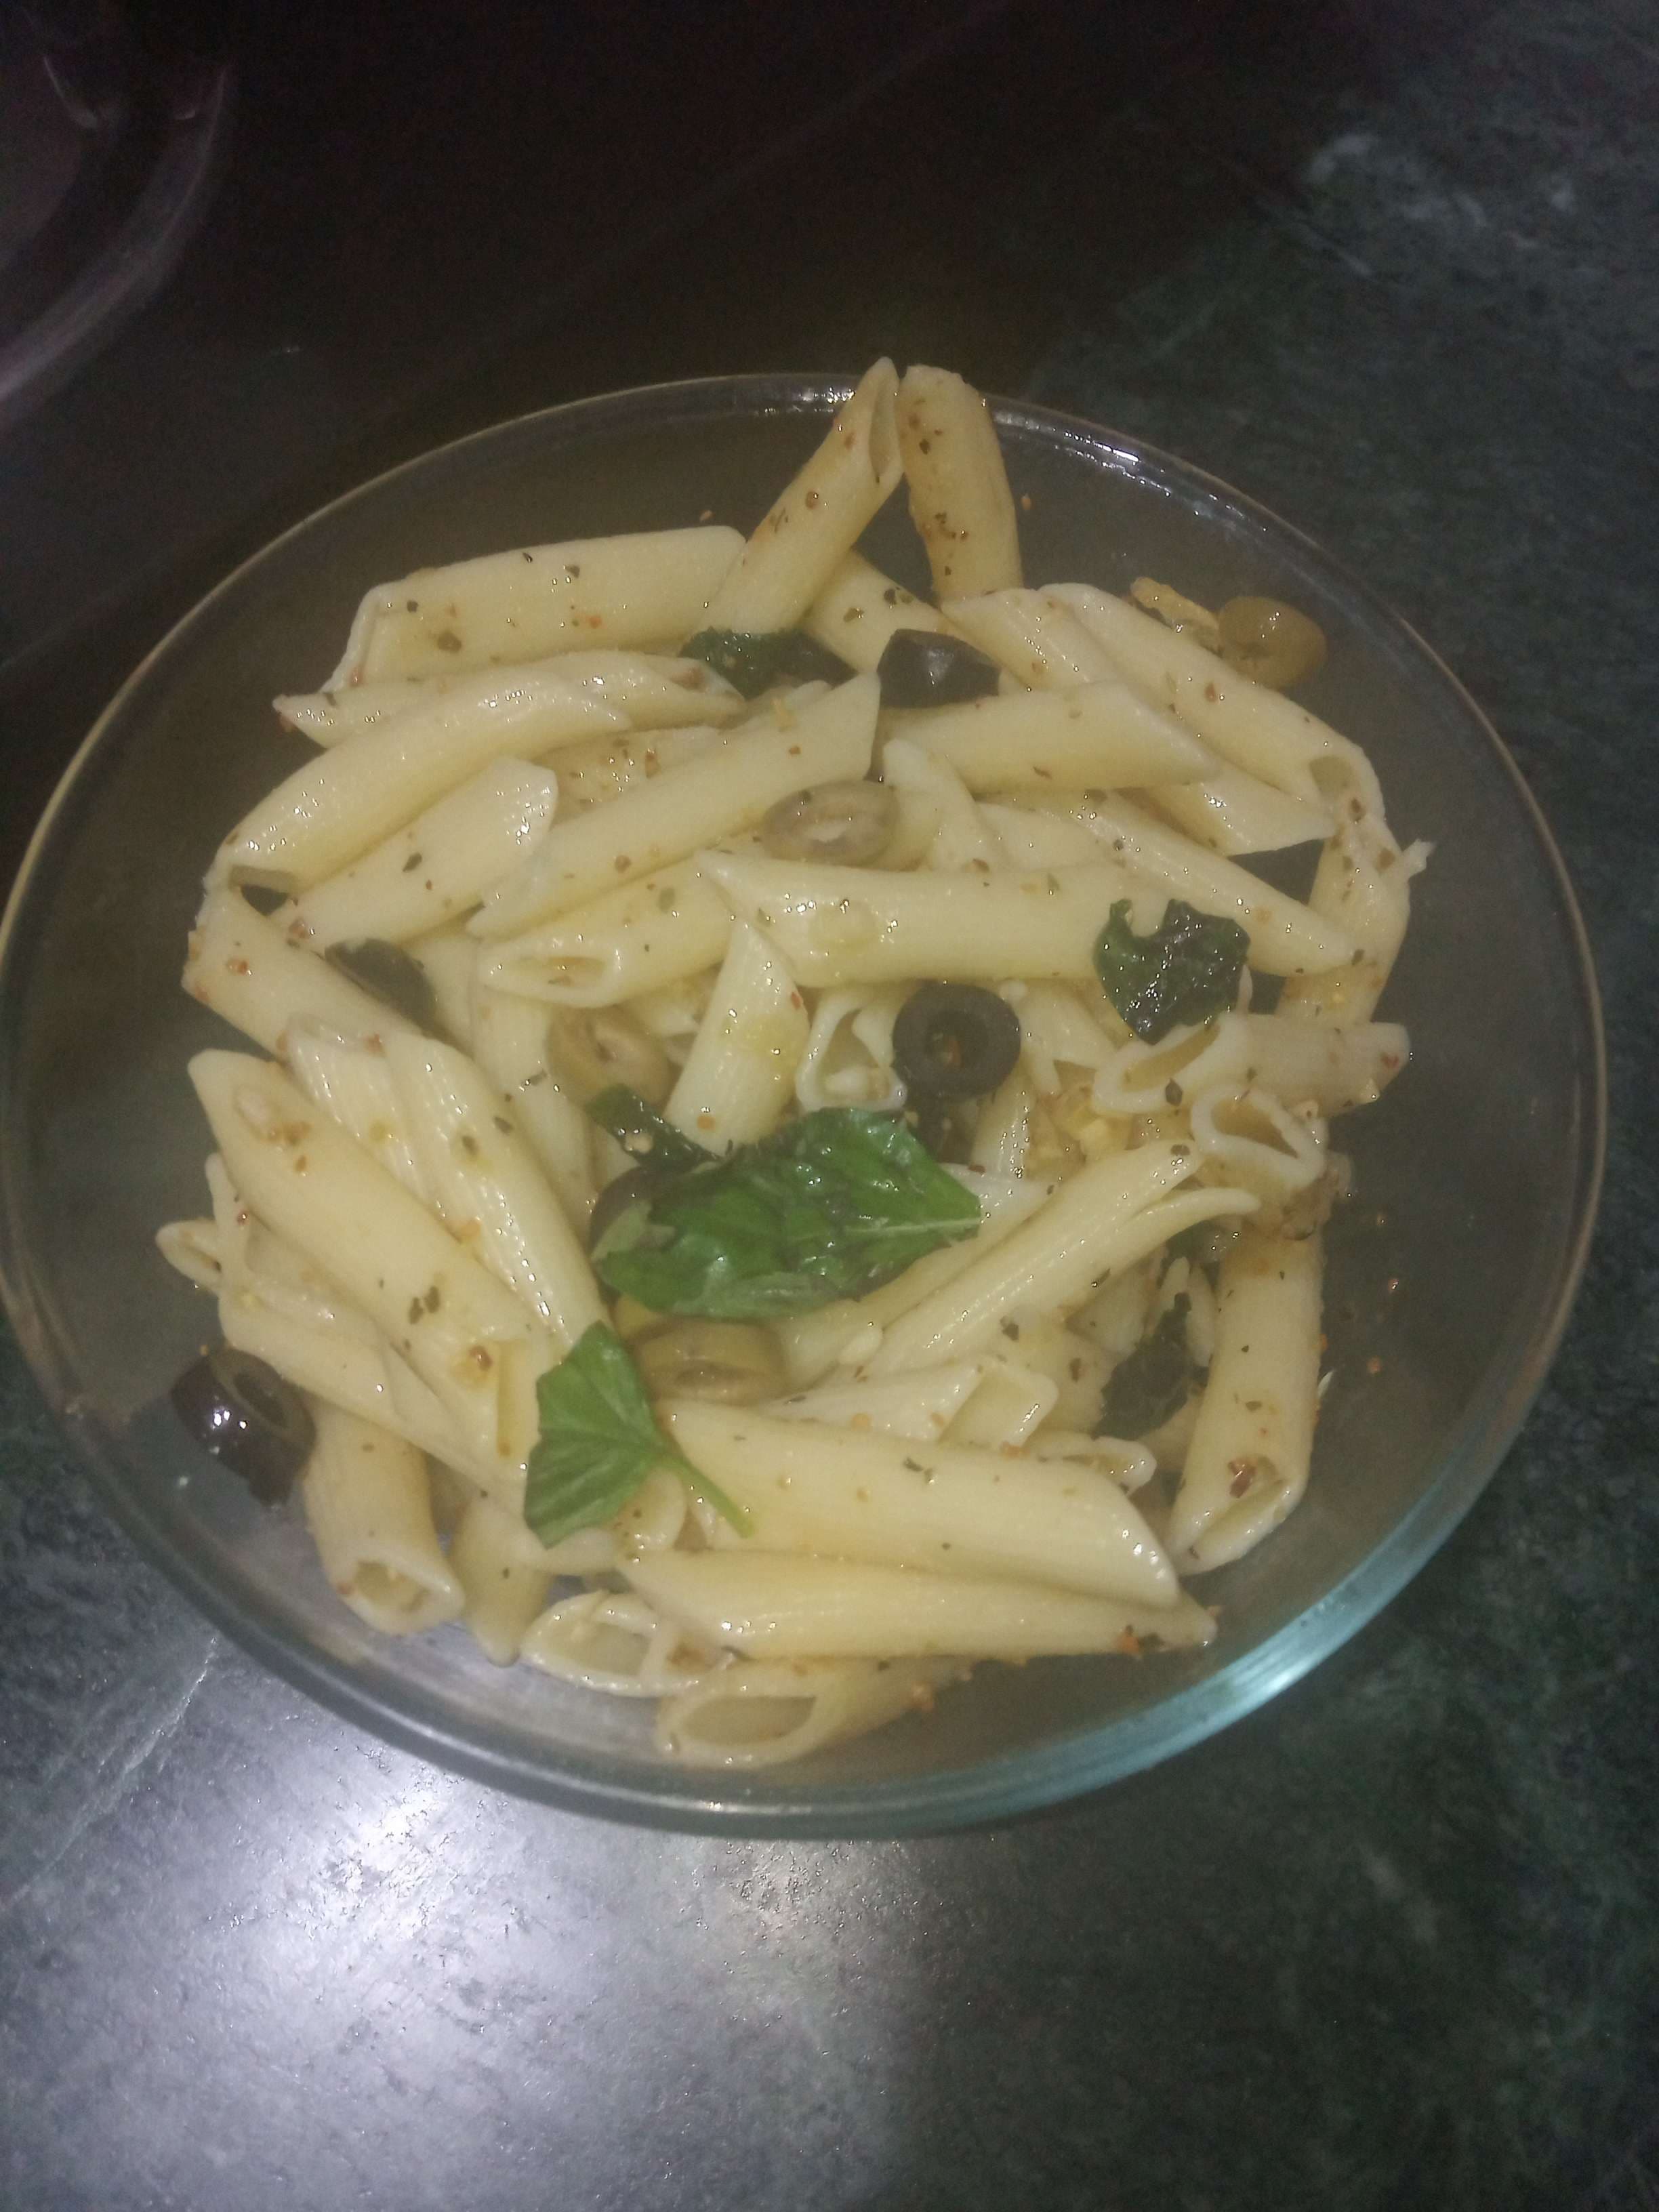 Tasty Spaghetti Aglio e Olio cooked by COOX chefs cooks during occasions parties events at home